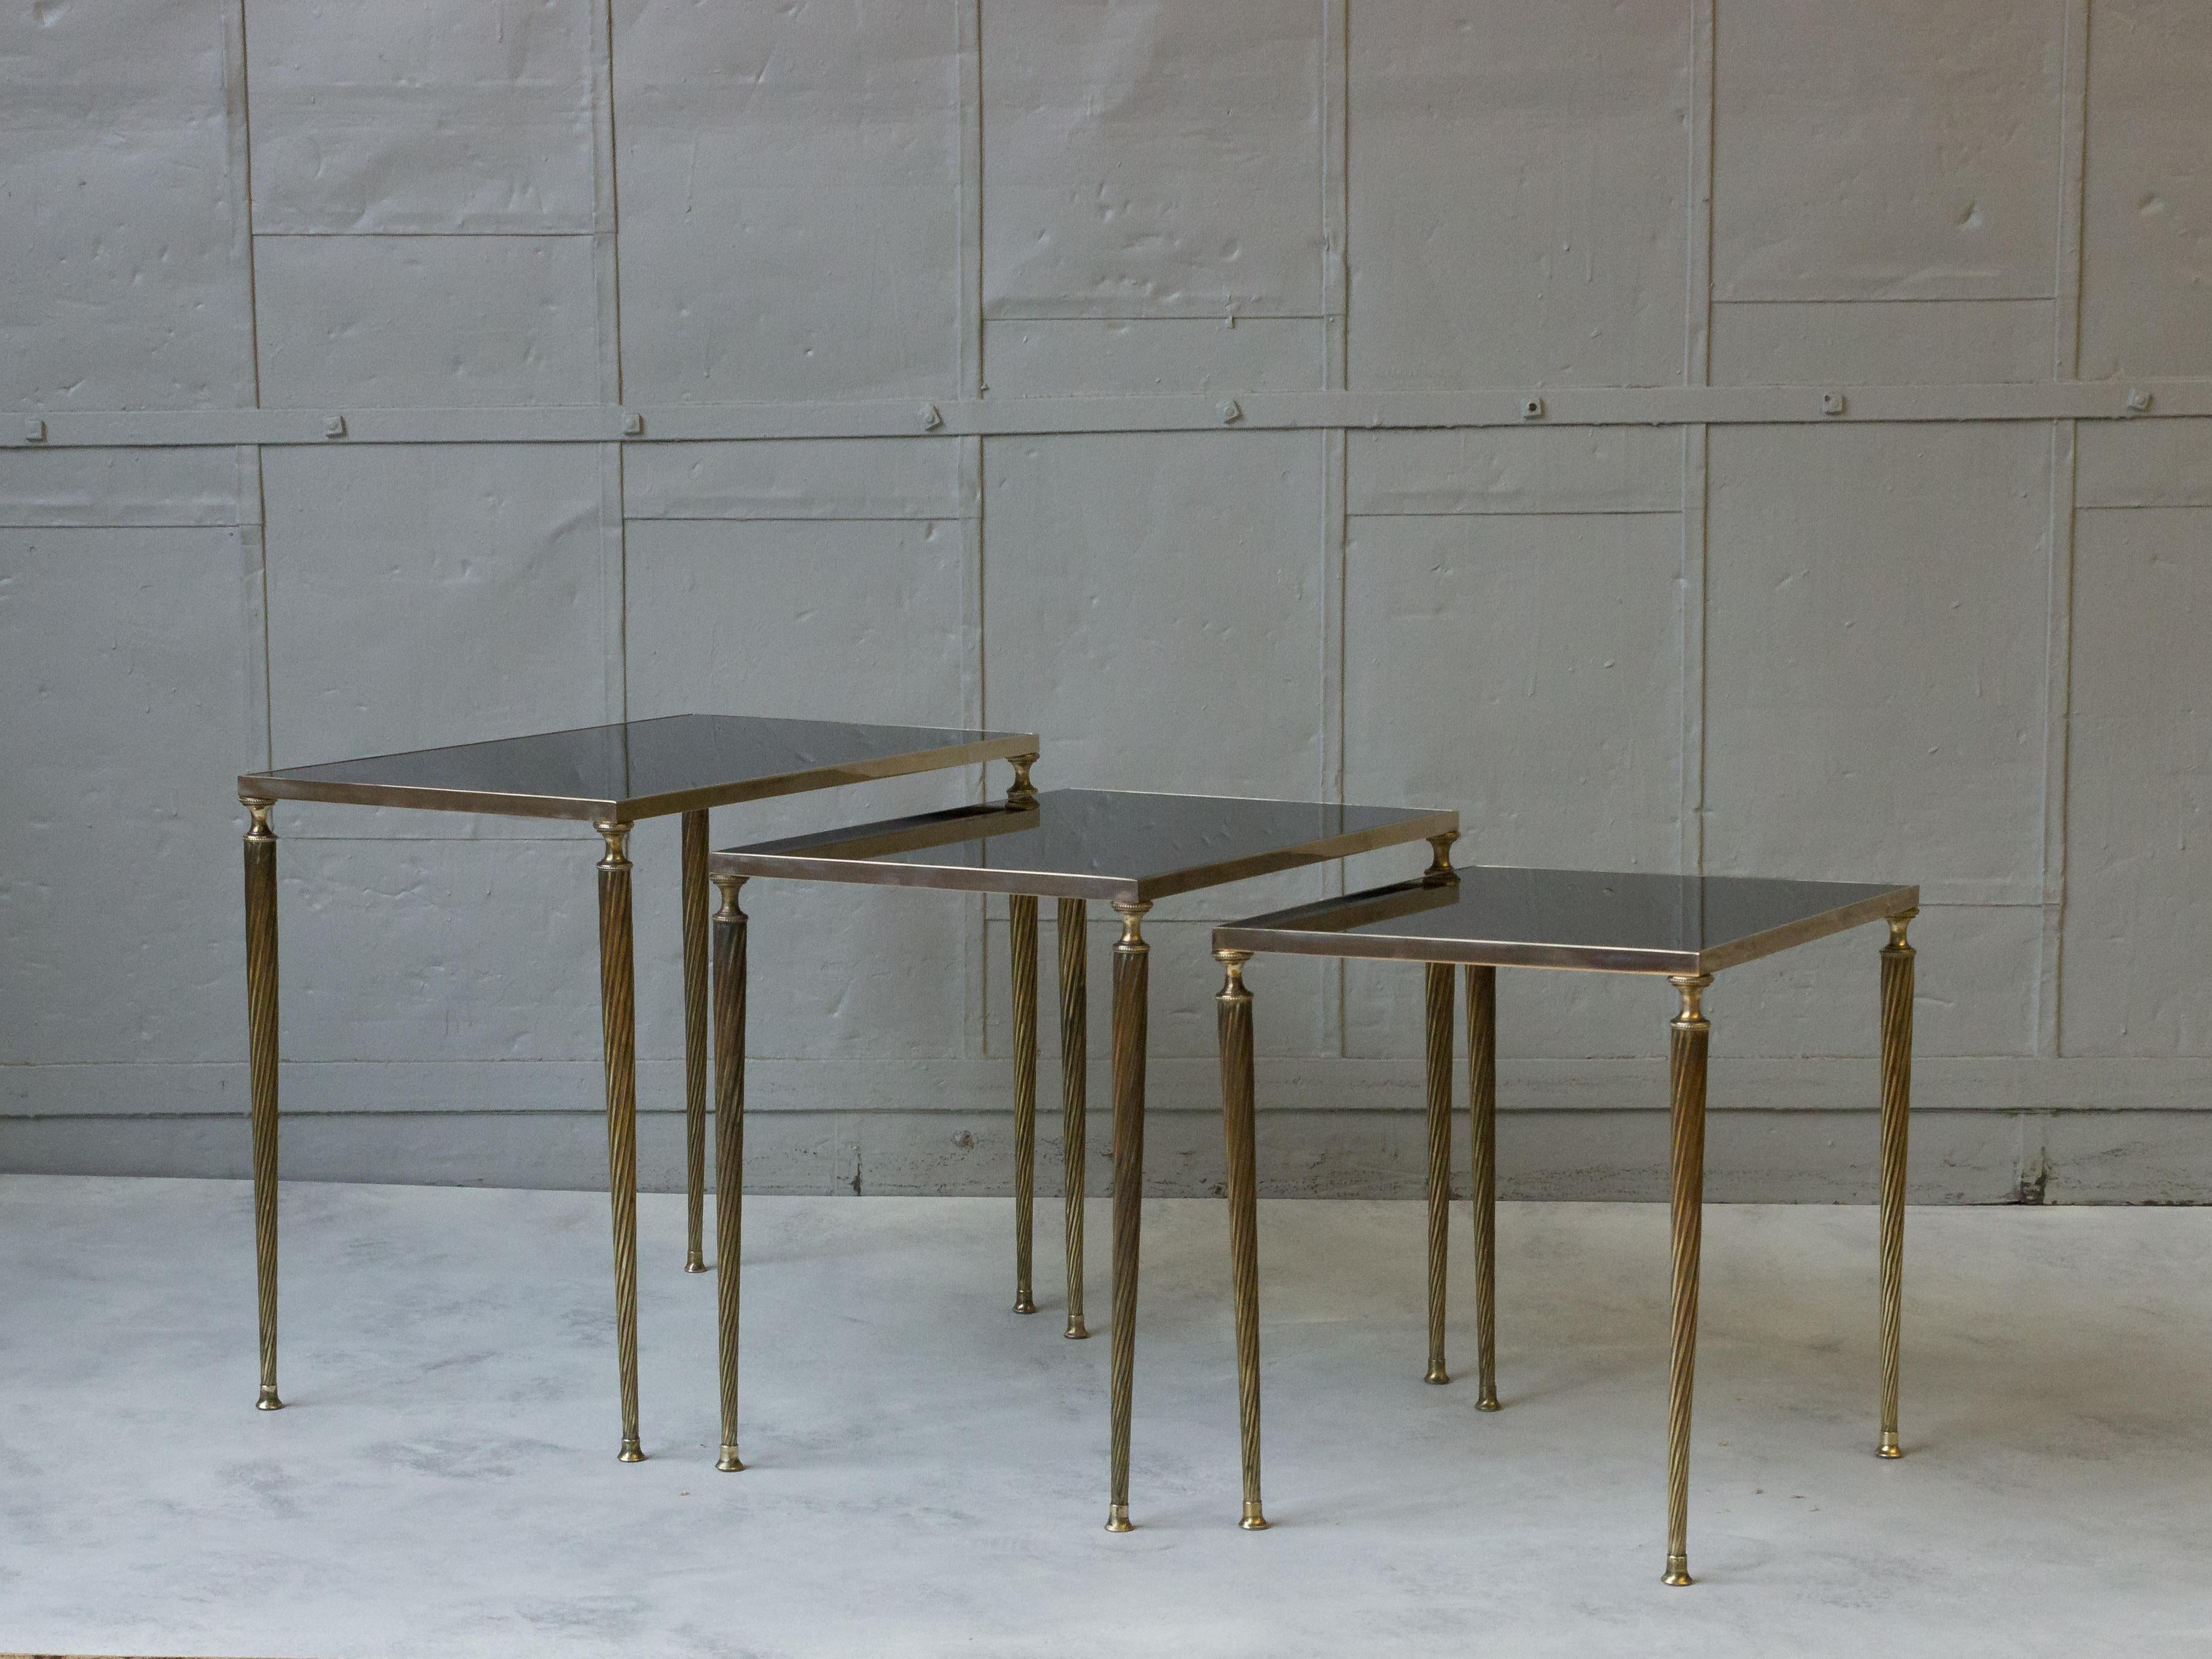 This set of three French nesting tables is a beautiful blend of black glass and brass, reflecting the distinctive style of Maison Jansen. Dating back to the 1940s, these tables feature spiral turned brass legs and frames that beautifully complement